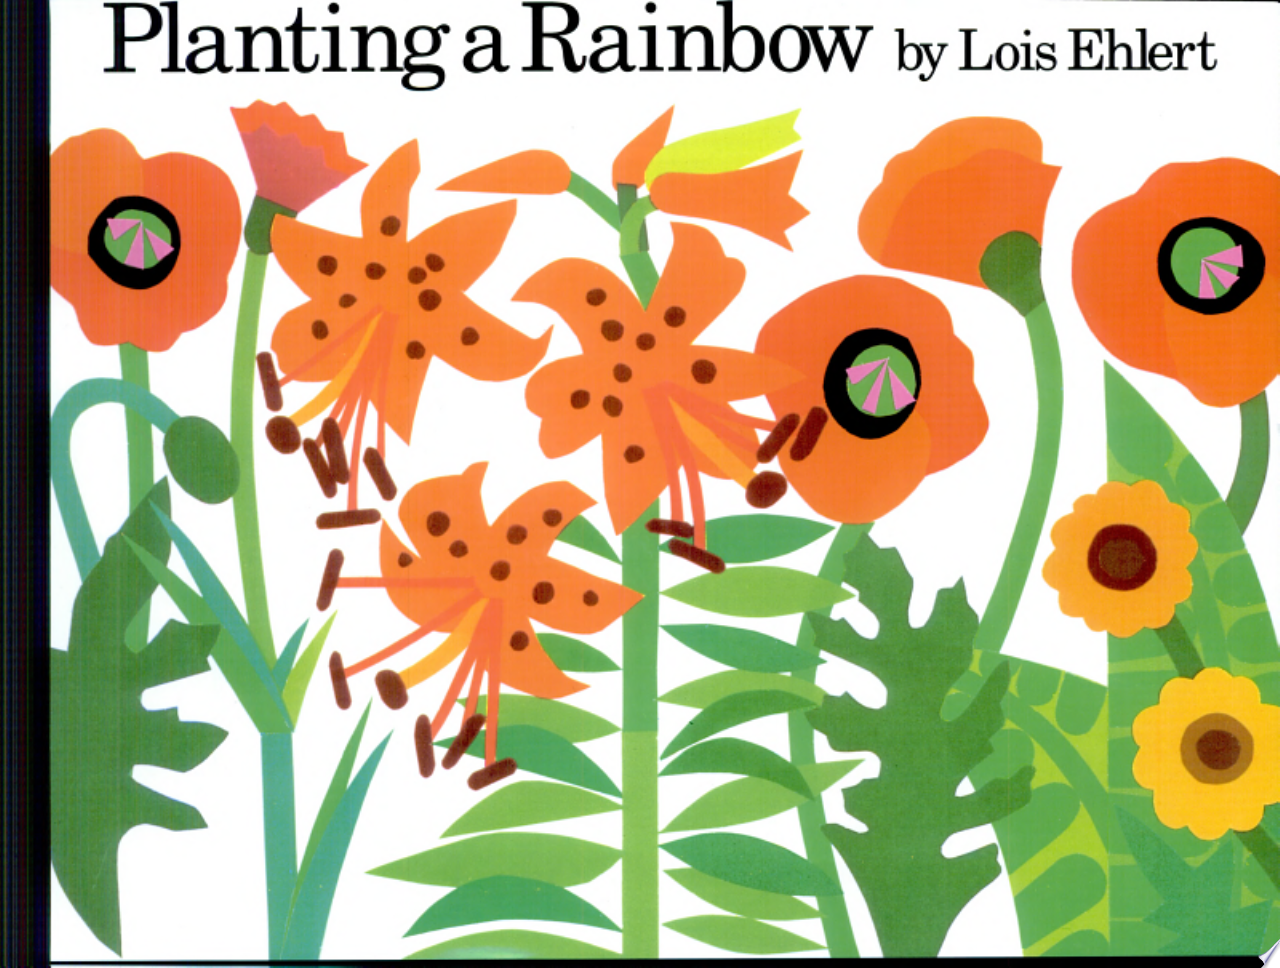 Image for "Planting a Rainbow"